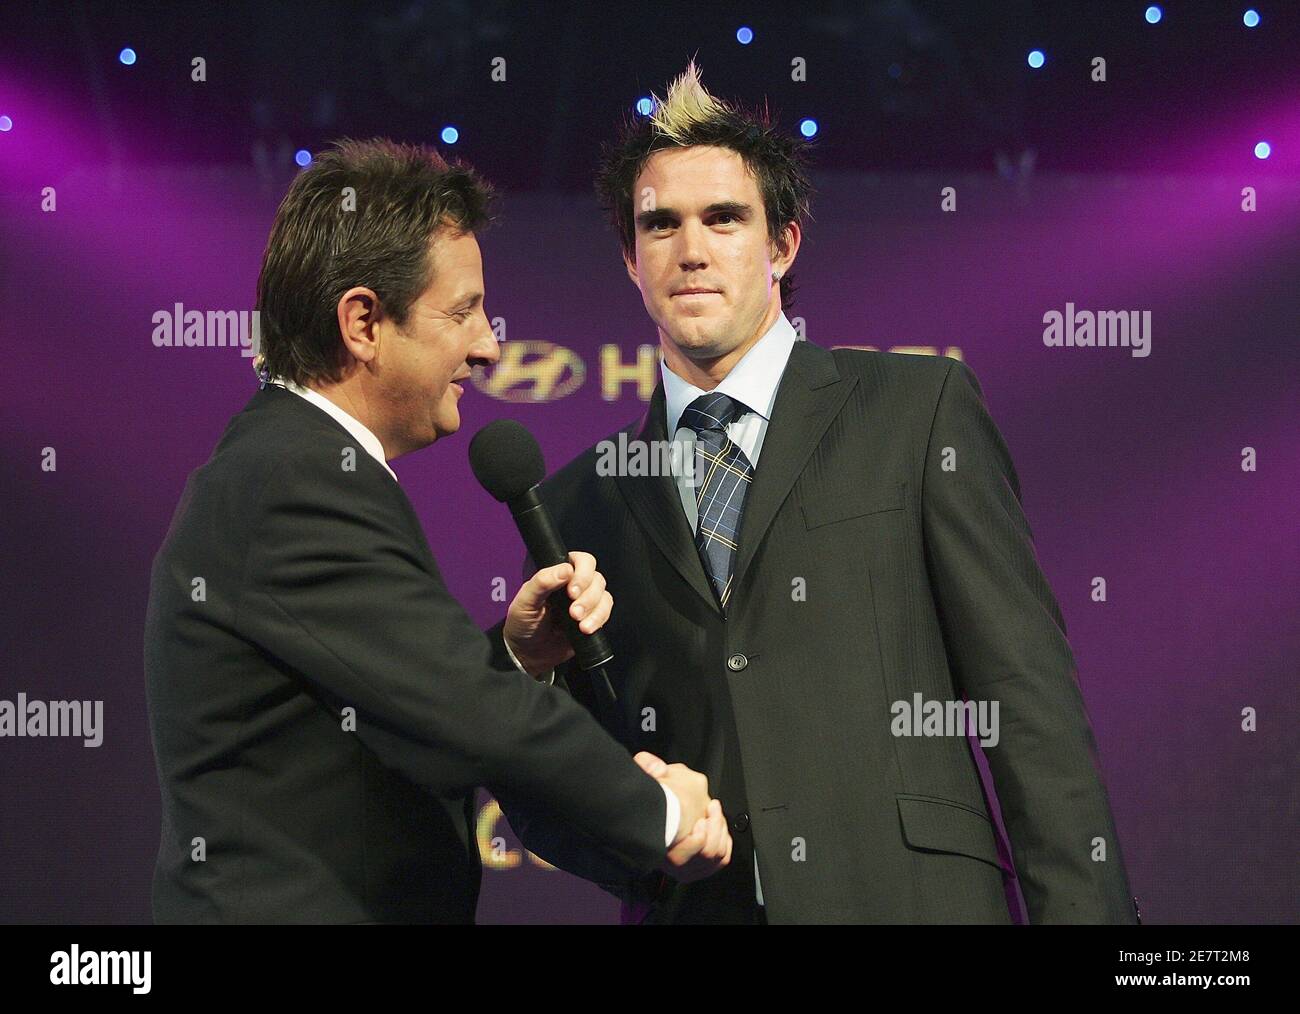 Kevin Pietersen (R) of England stands with Mark Nicholas after receiving the ODI Player of the Year award during the International Cricket Council (ICC) Awards ceremony in Sydney October 11, 2005. REUTERS/Matt King/Pool Stock Photo